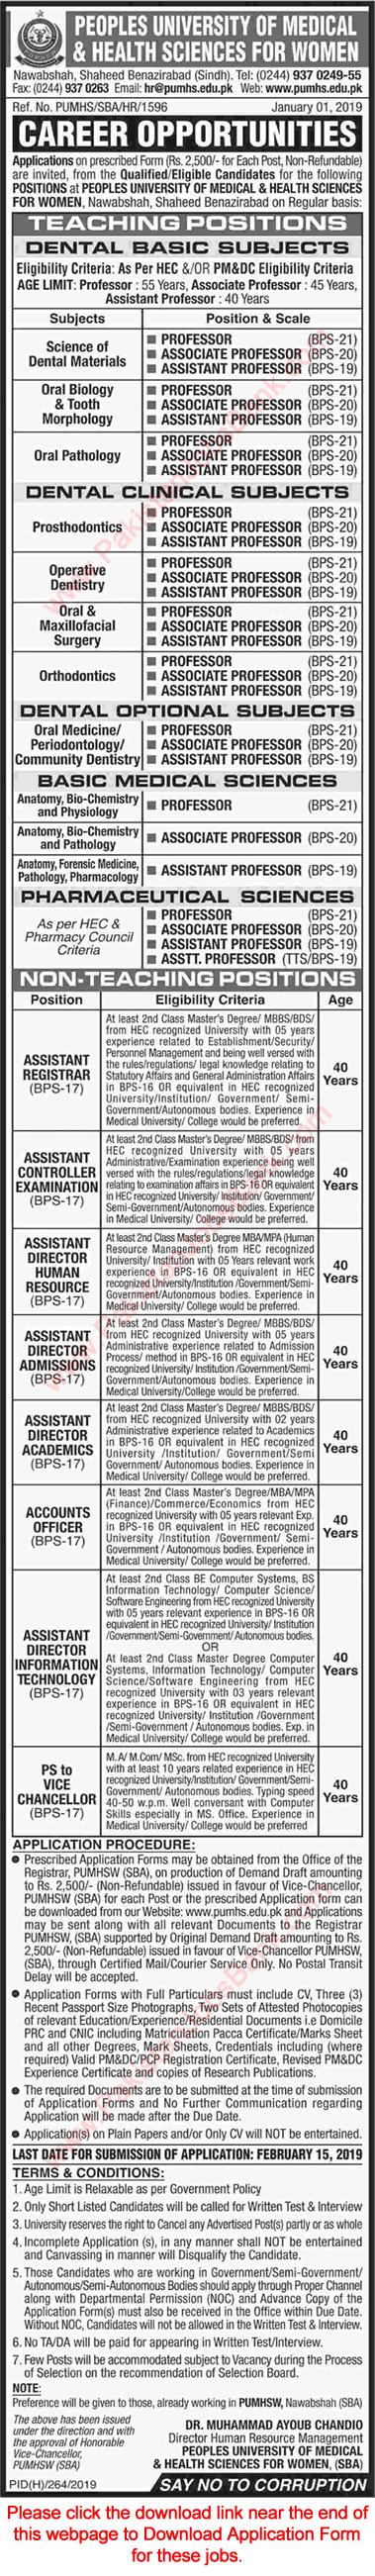 PUMHS Nawabshah Jobs 2019 Application Form Peoples University of Medical and Health Sciences for Women Latest